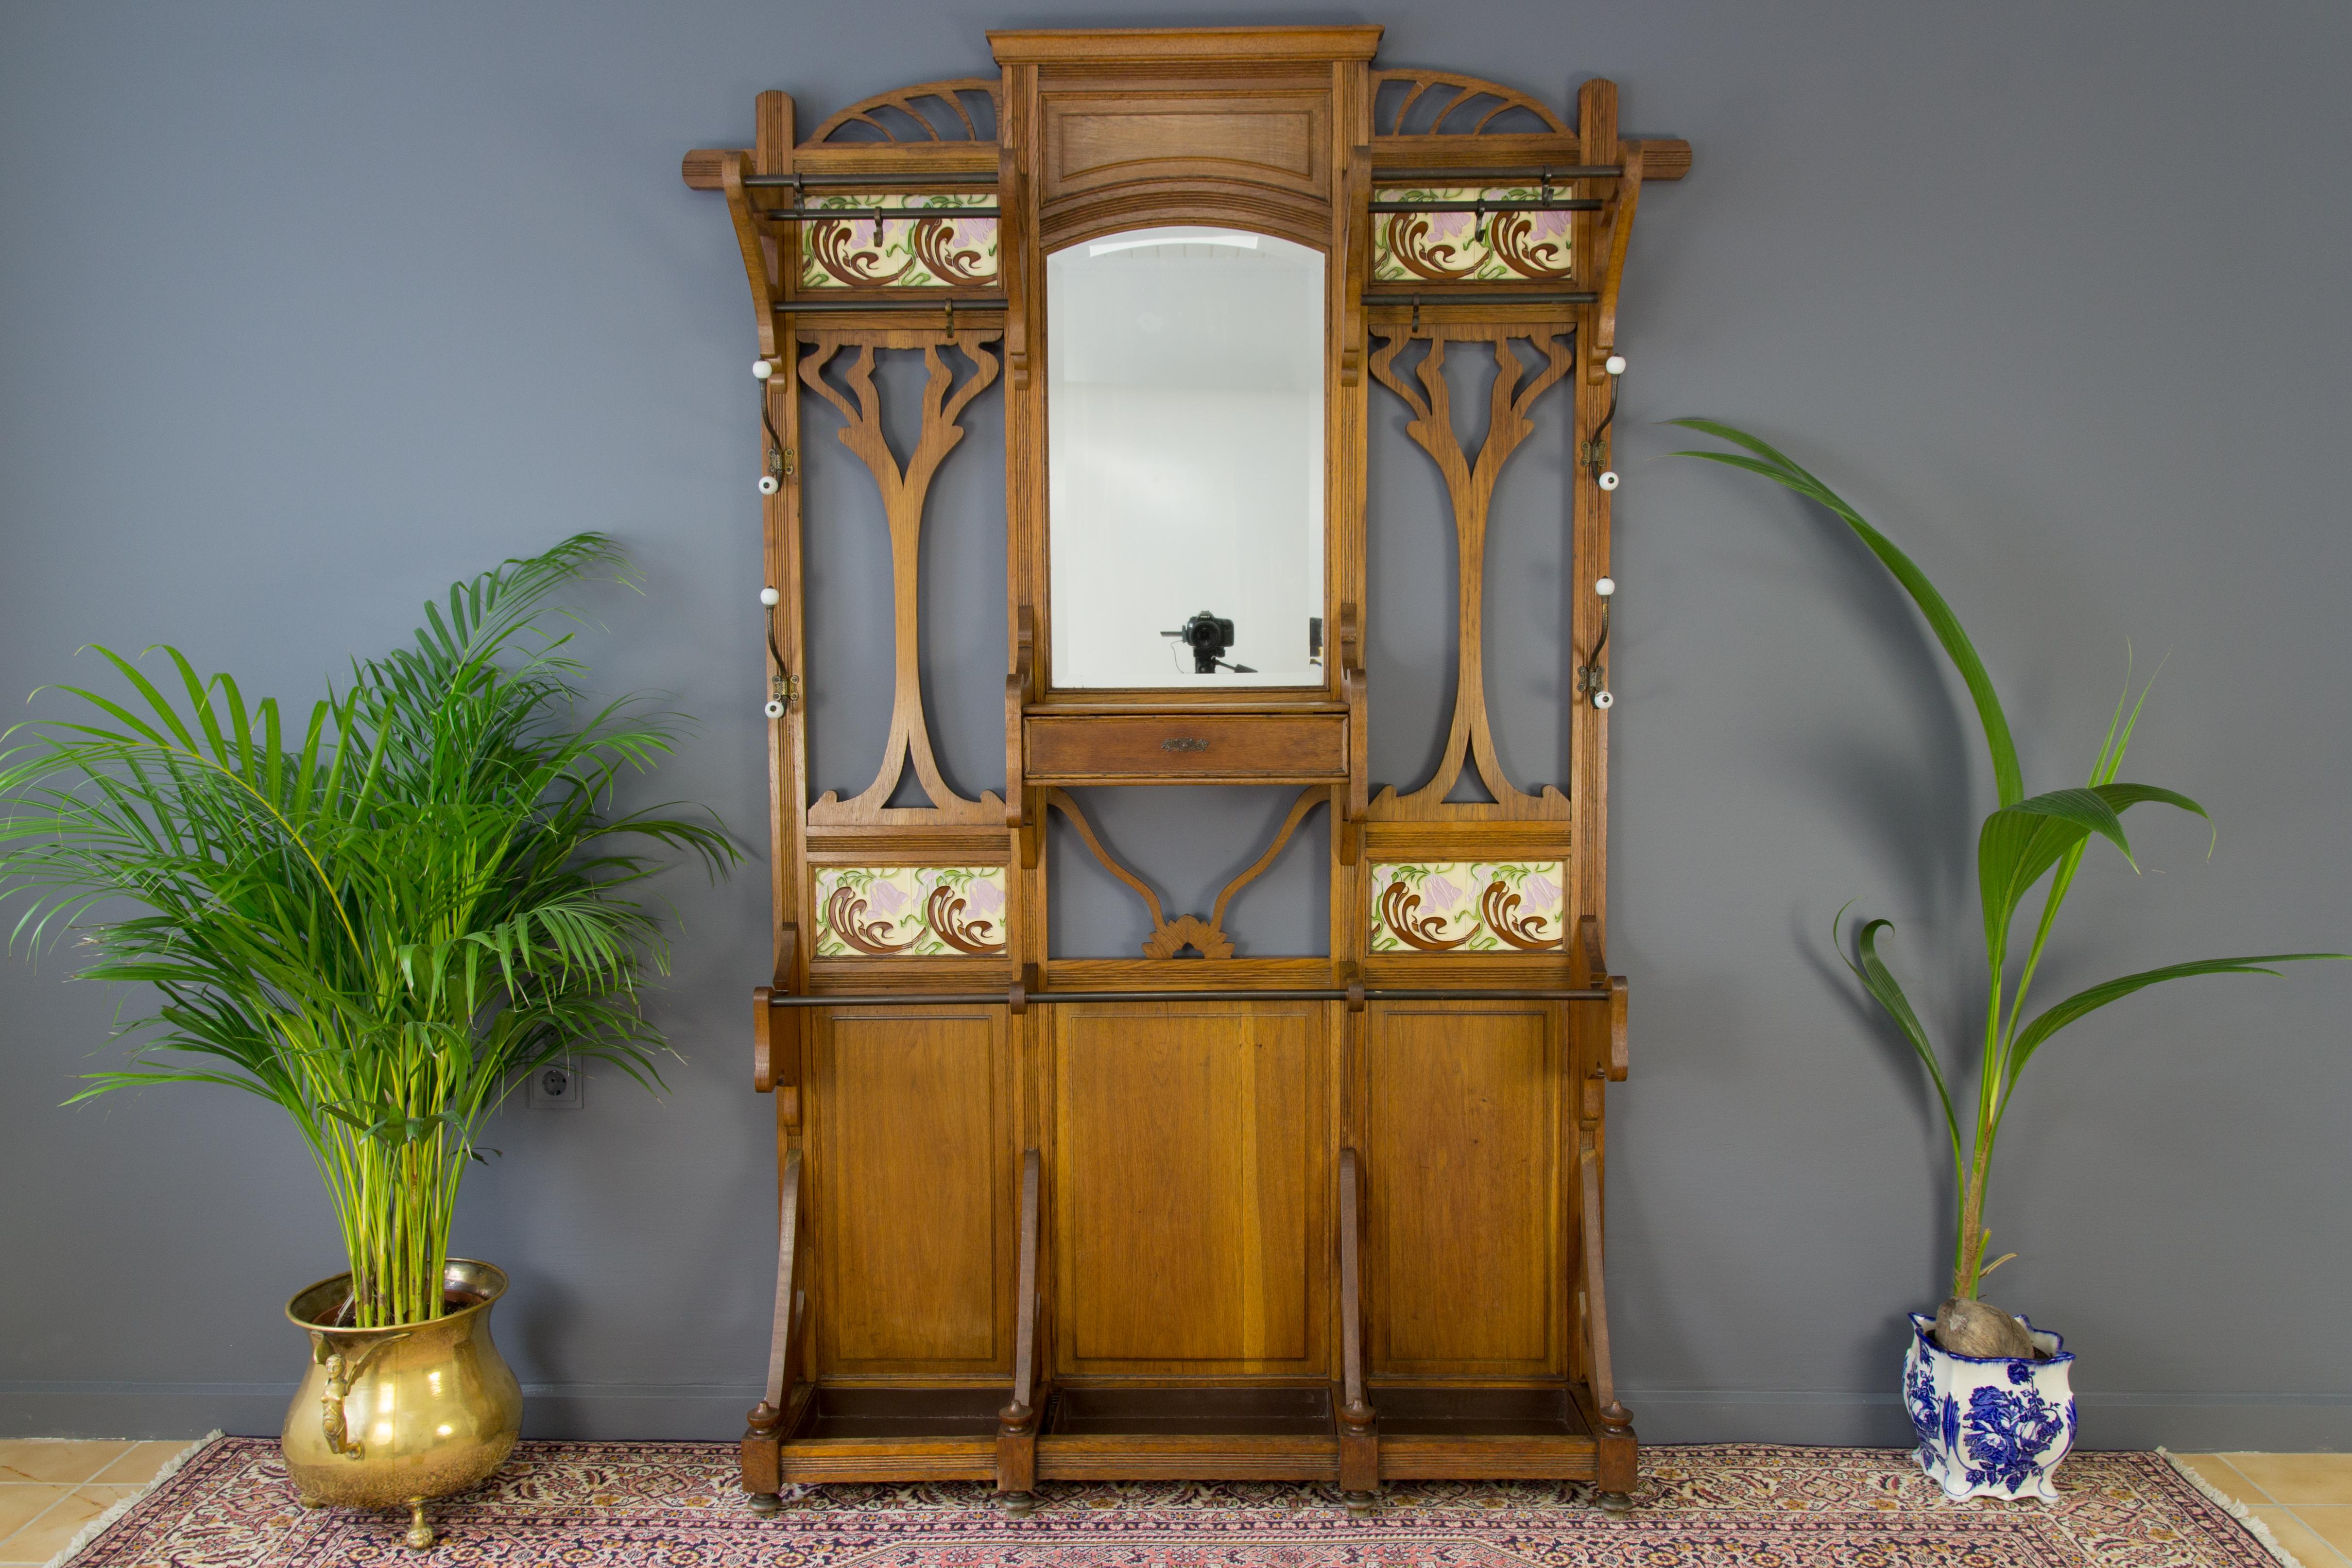 A magnificent French hall stand or hall tree from the Art Nouveau period in the early 1900s has original beveled edge mirror, coat and hat hooks, floral tiles and three drip trays. Beautiful, well-proportioned oak frame in an Art Nouveau typical